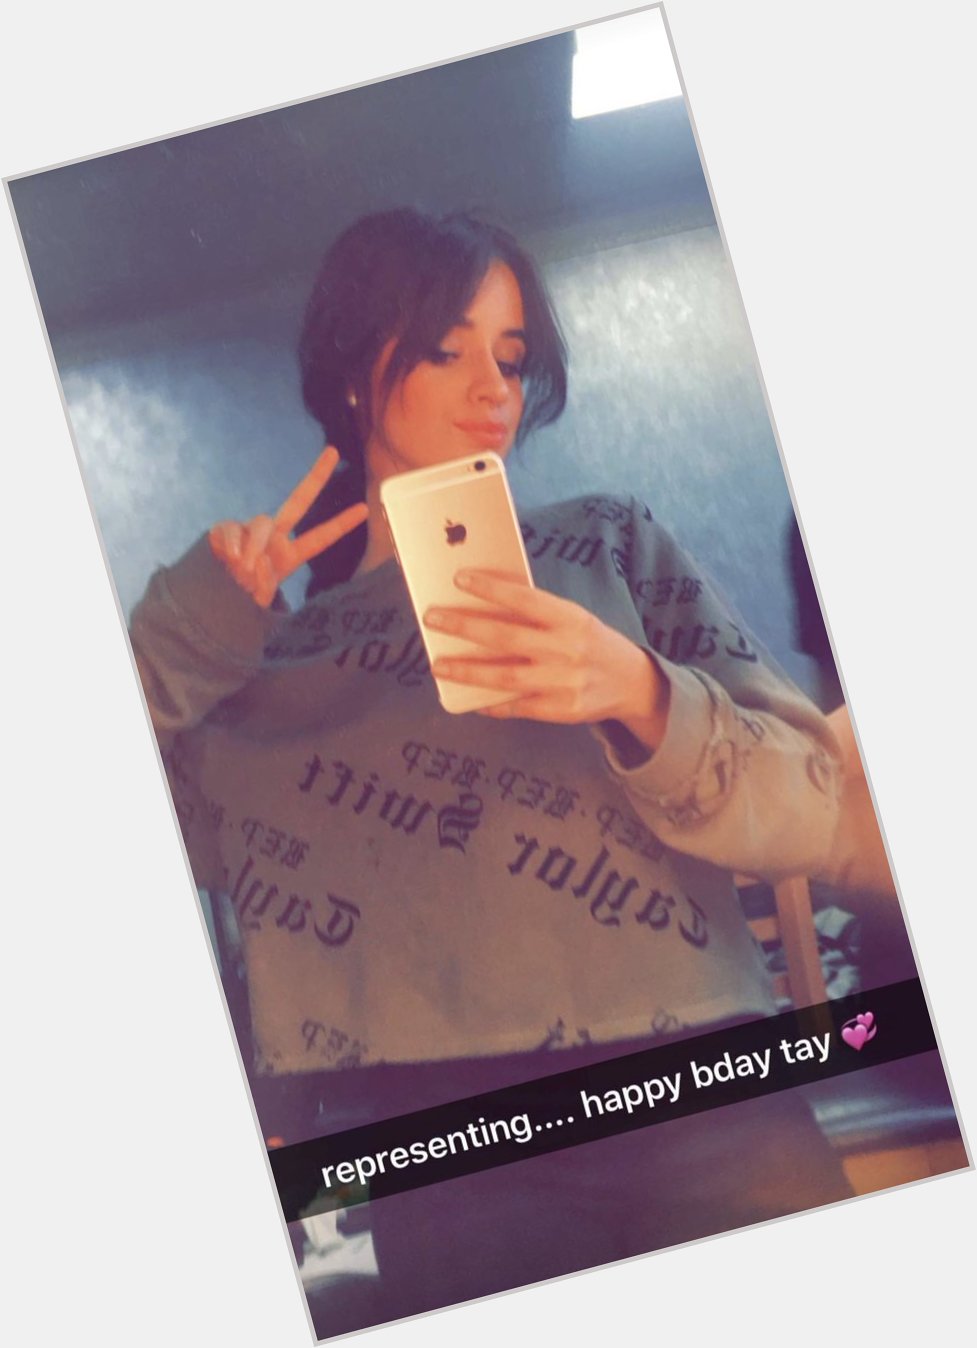 Camila Cabello wishes Taylor Swift a happy birthday while wearing her merch. 